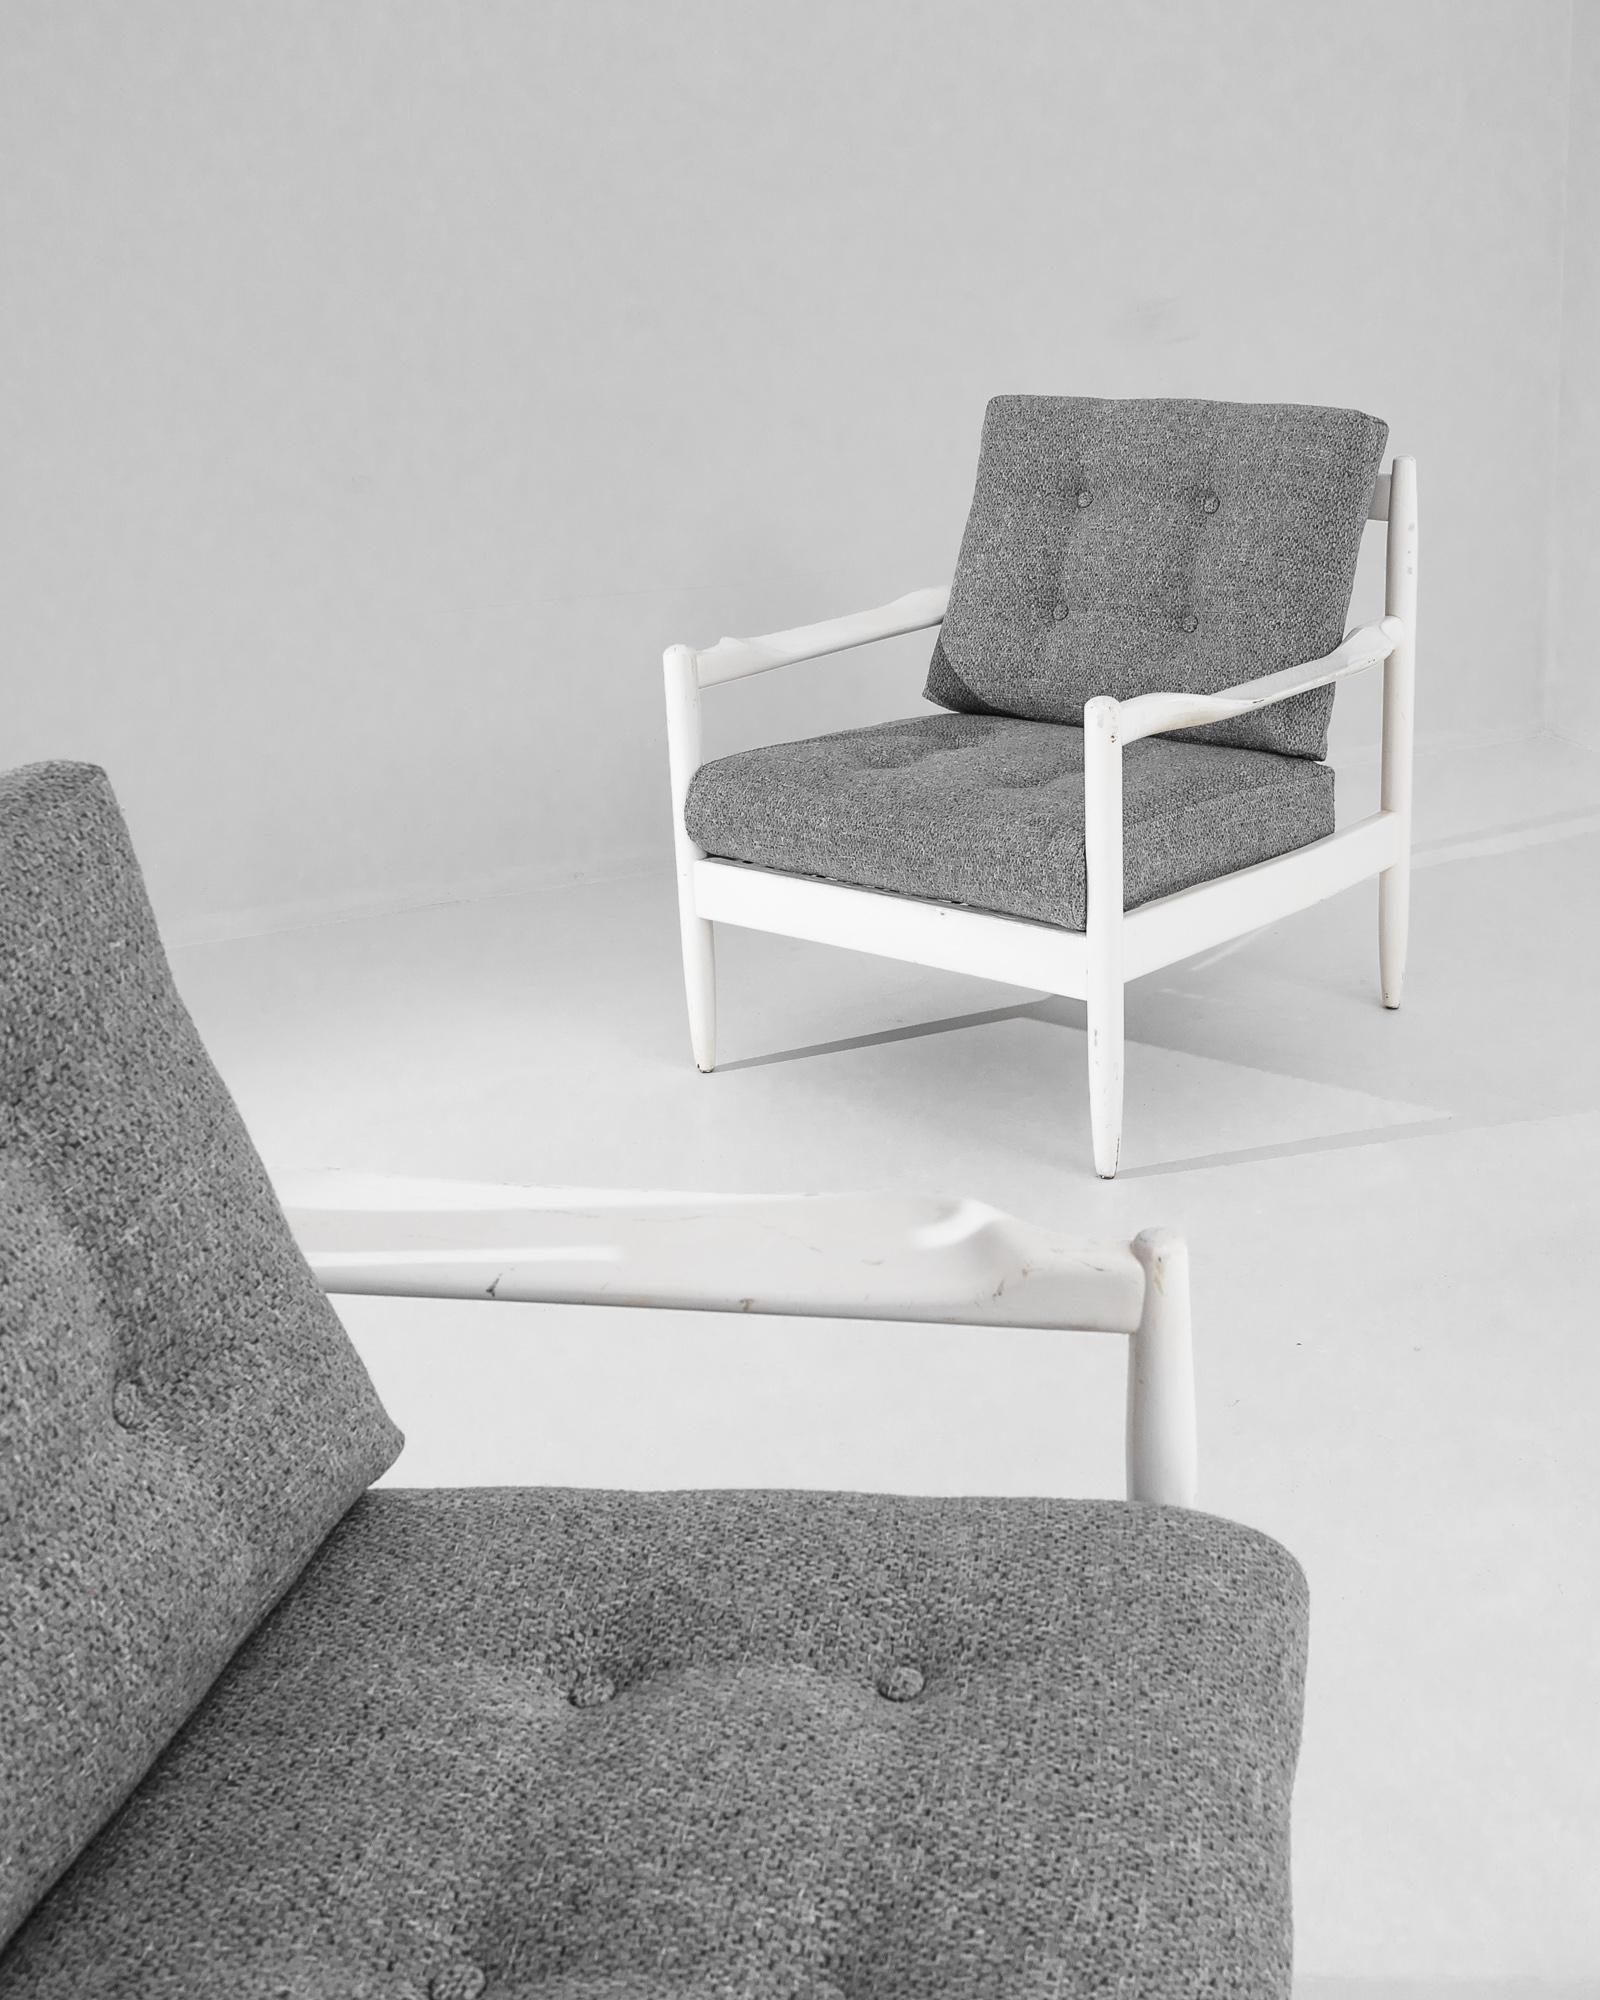 Introducing a pair of 1960s Danish Wooden Armchairs—a timeless tribute to classic Scandinavian design. These one-of-a-kind antique treasures boast sleek white frames that provide a striking contrast with the rich, textured grey upholstery. Each